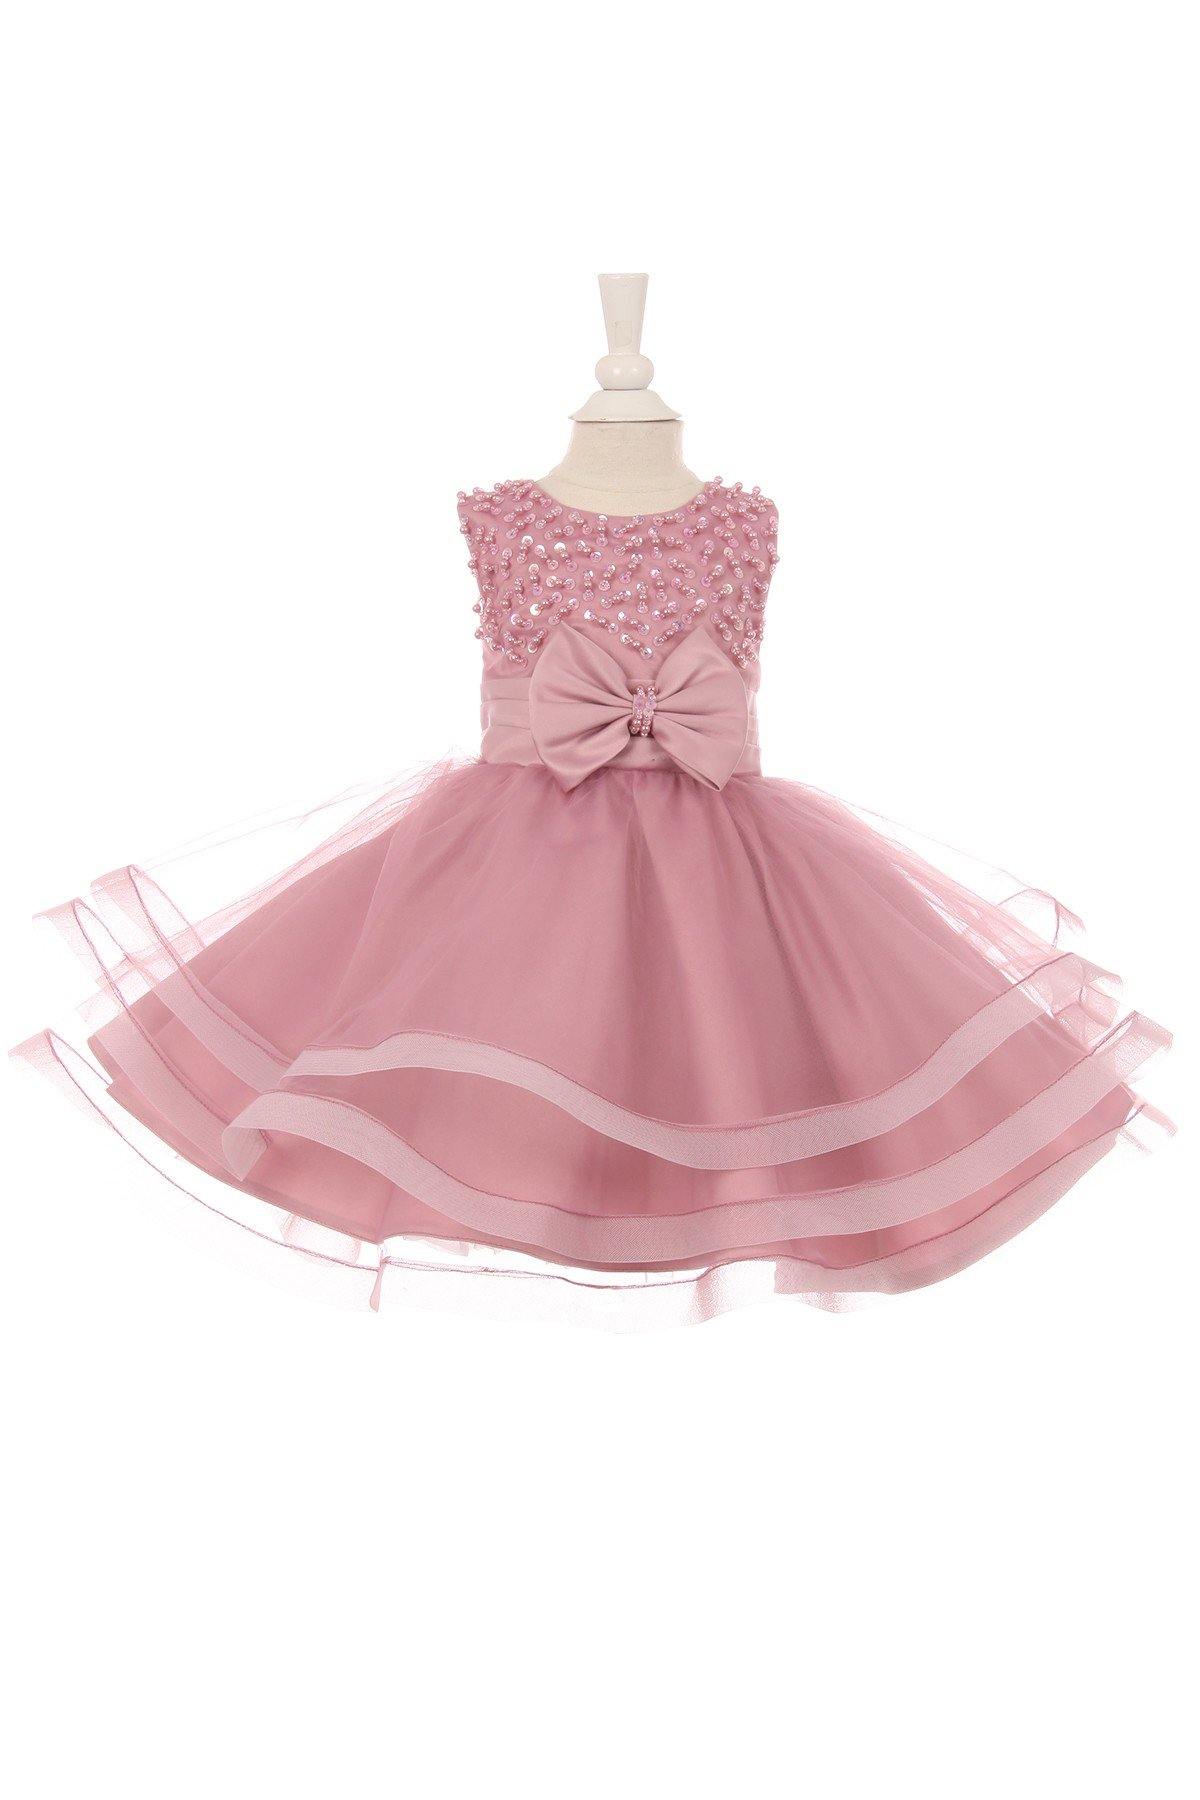 Sleeveless Flower Girls Dress Embroidered Bodice - The Dress Outlet Cinderella Couture